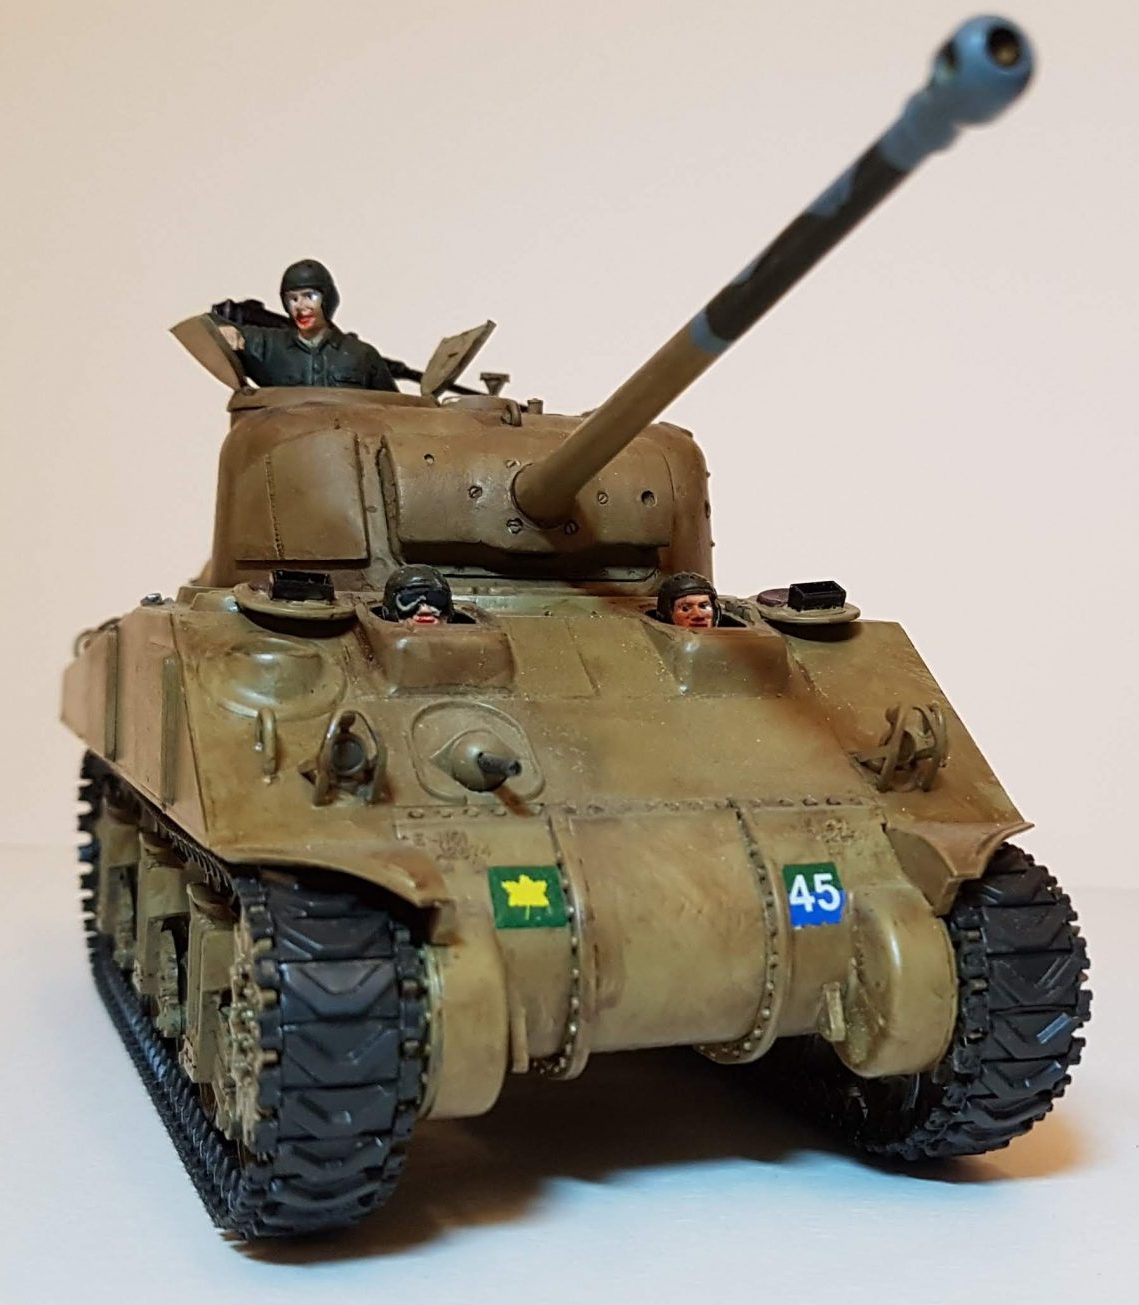 Canadian M4 Sherman (WW2) - View 1 - 1/35 Scale - Built By Wright Built - Tamiya, Formations